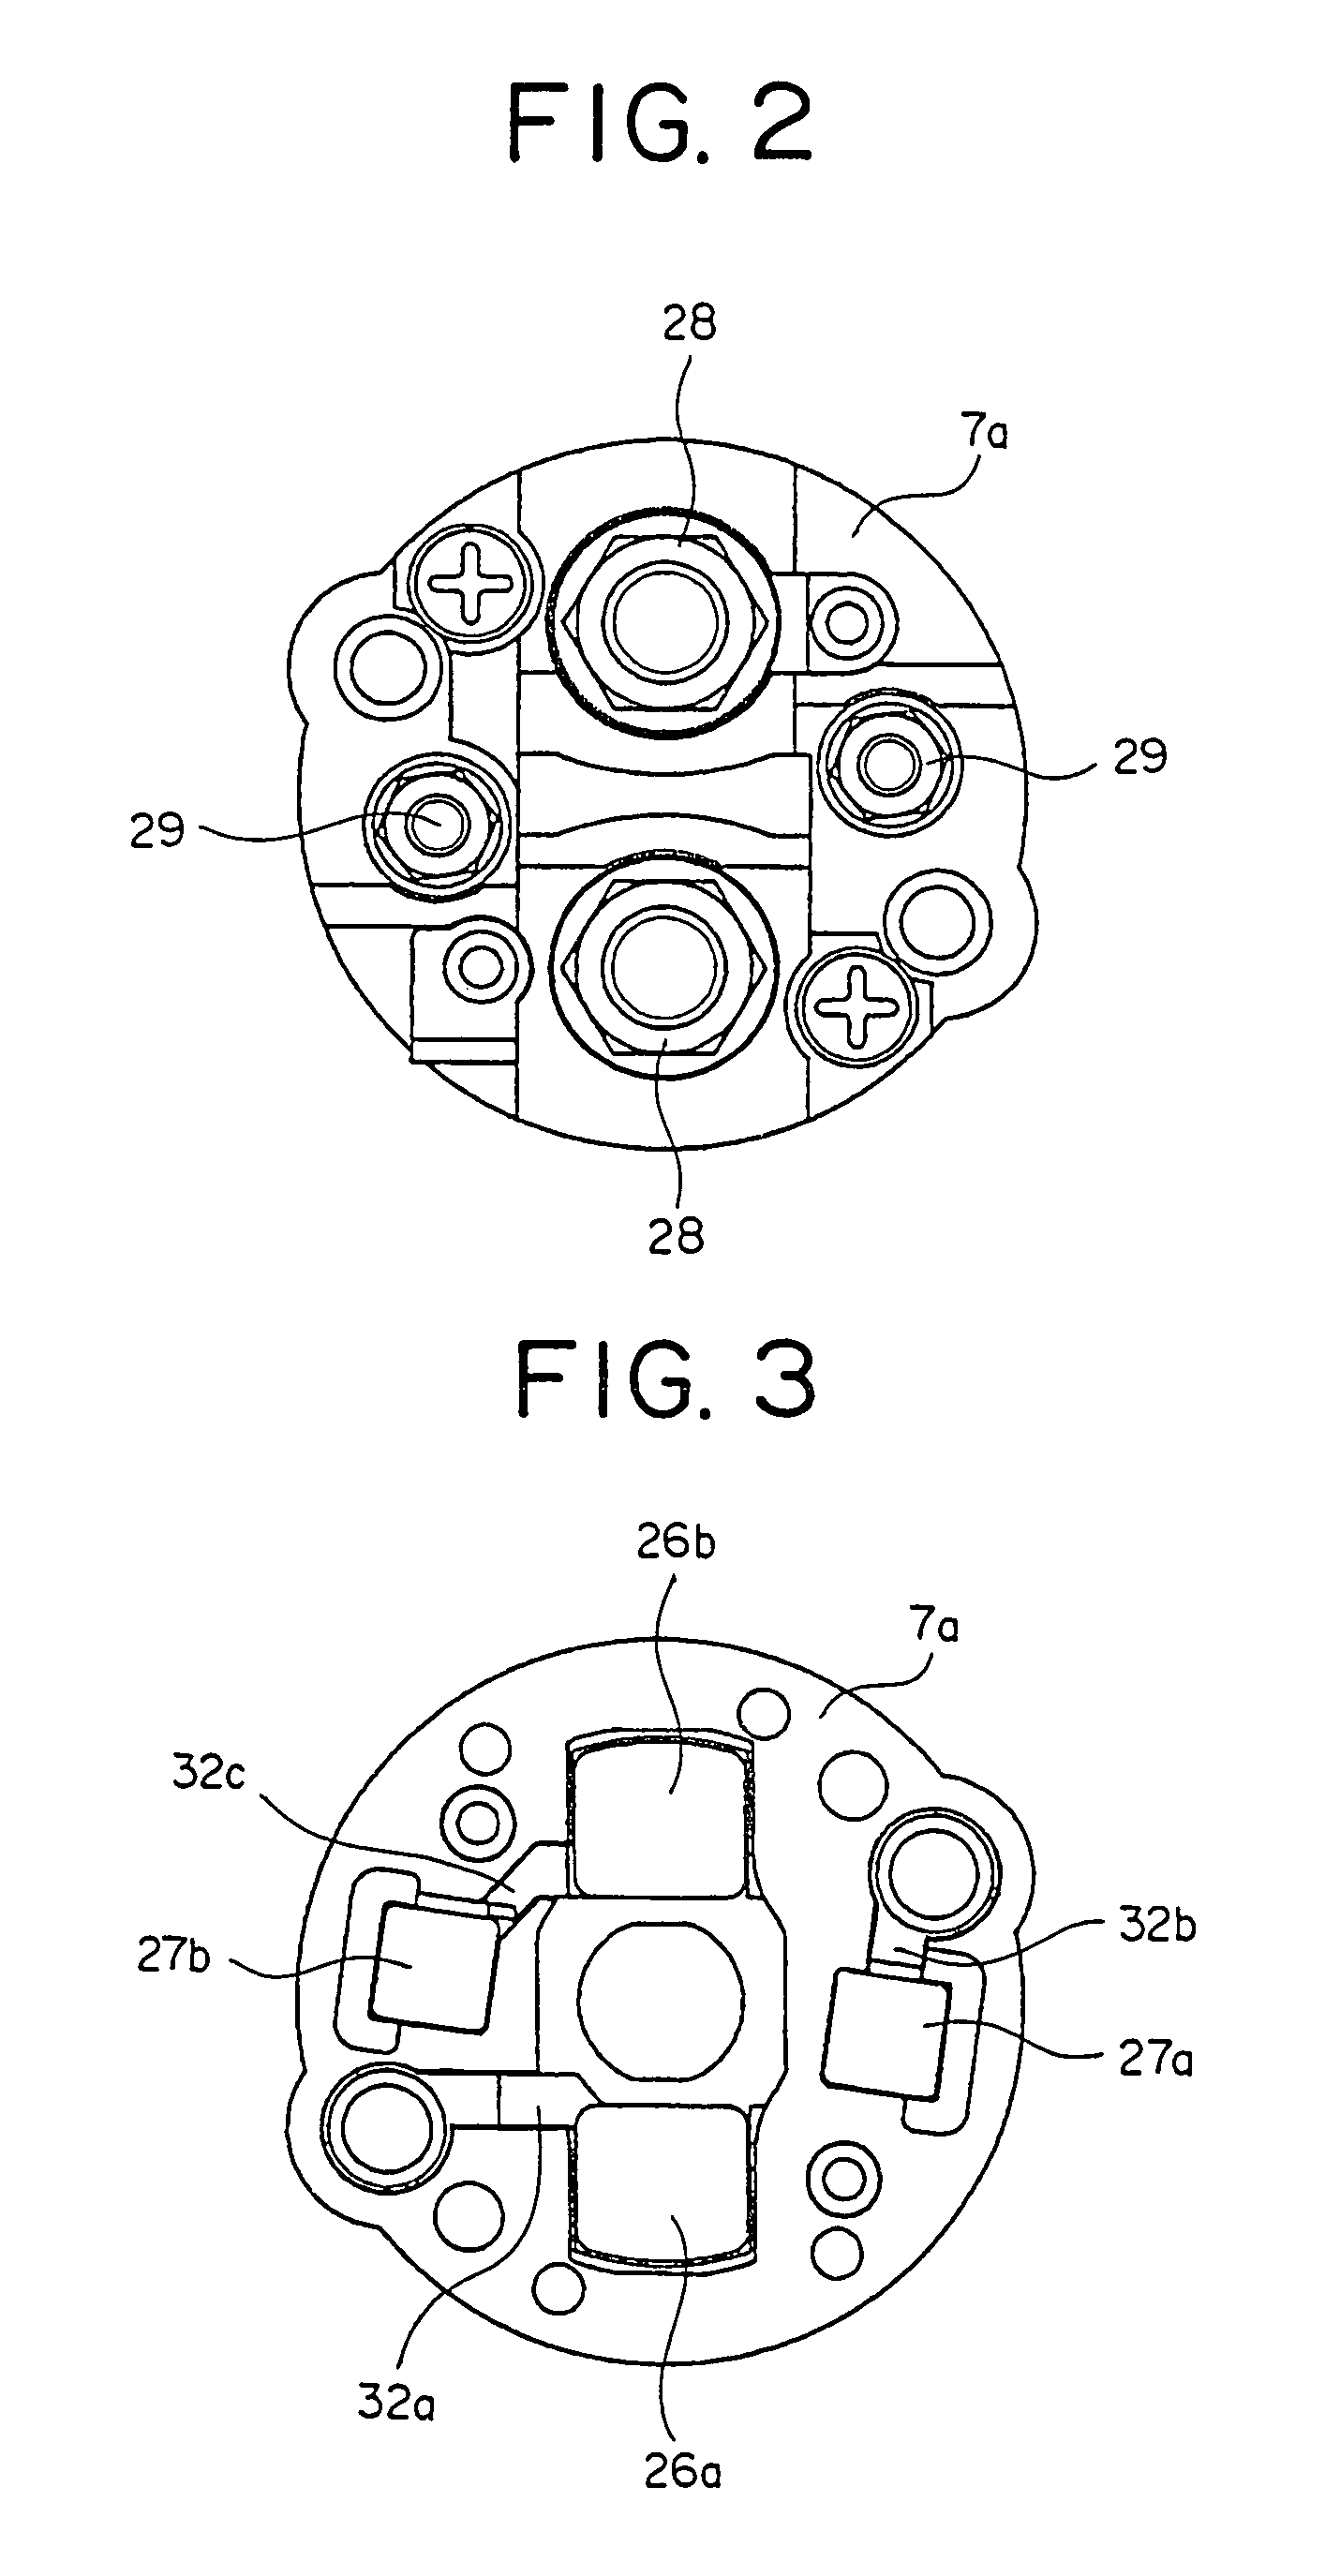 Electromagnetic starter switch